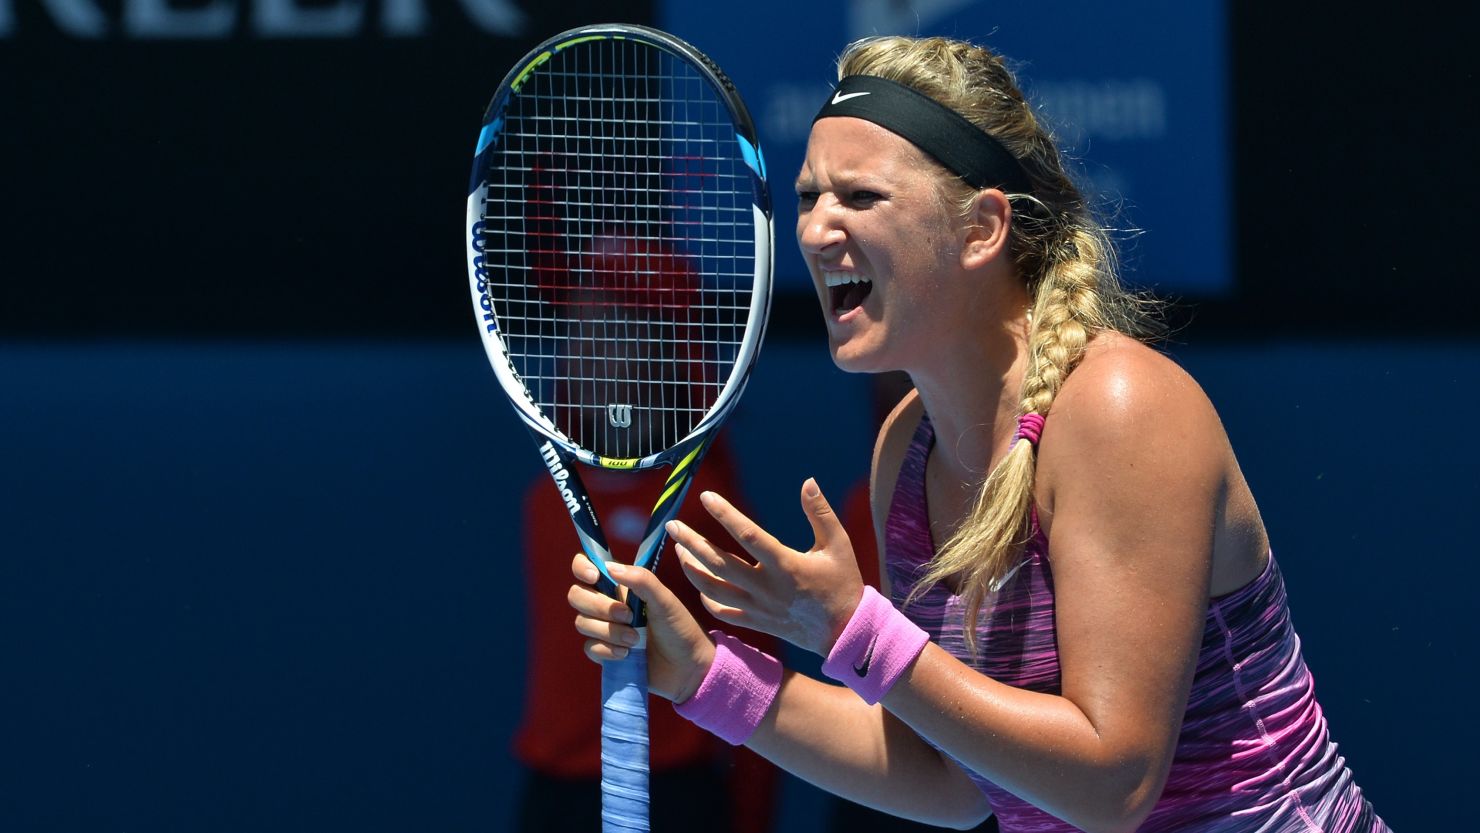 World No. 2 Victoria Azarenka had taken the women's title at Melbourne Park in each of the past two years.